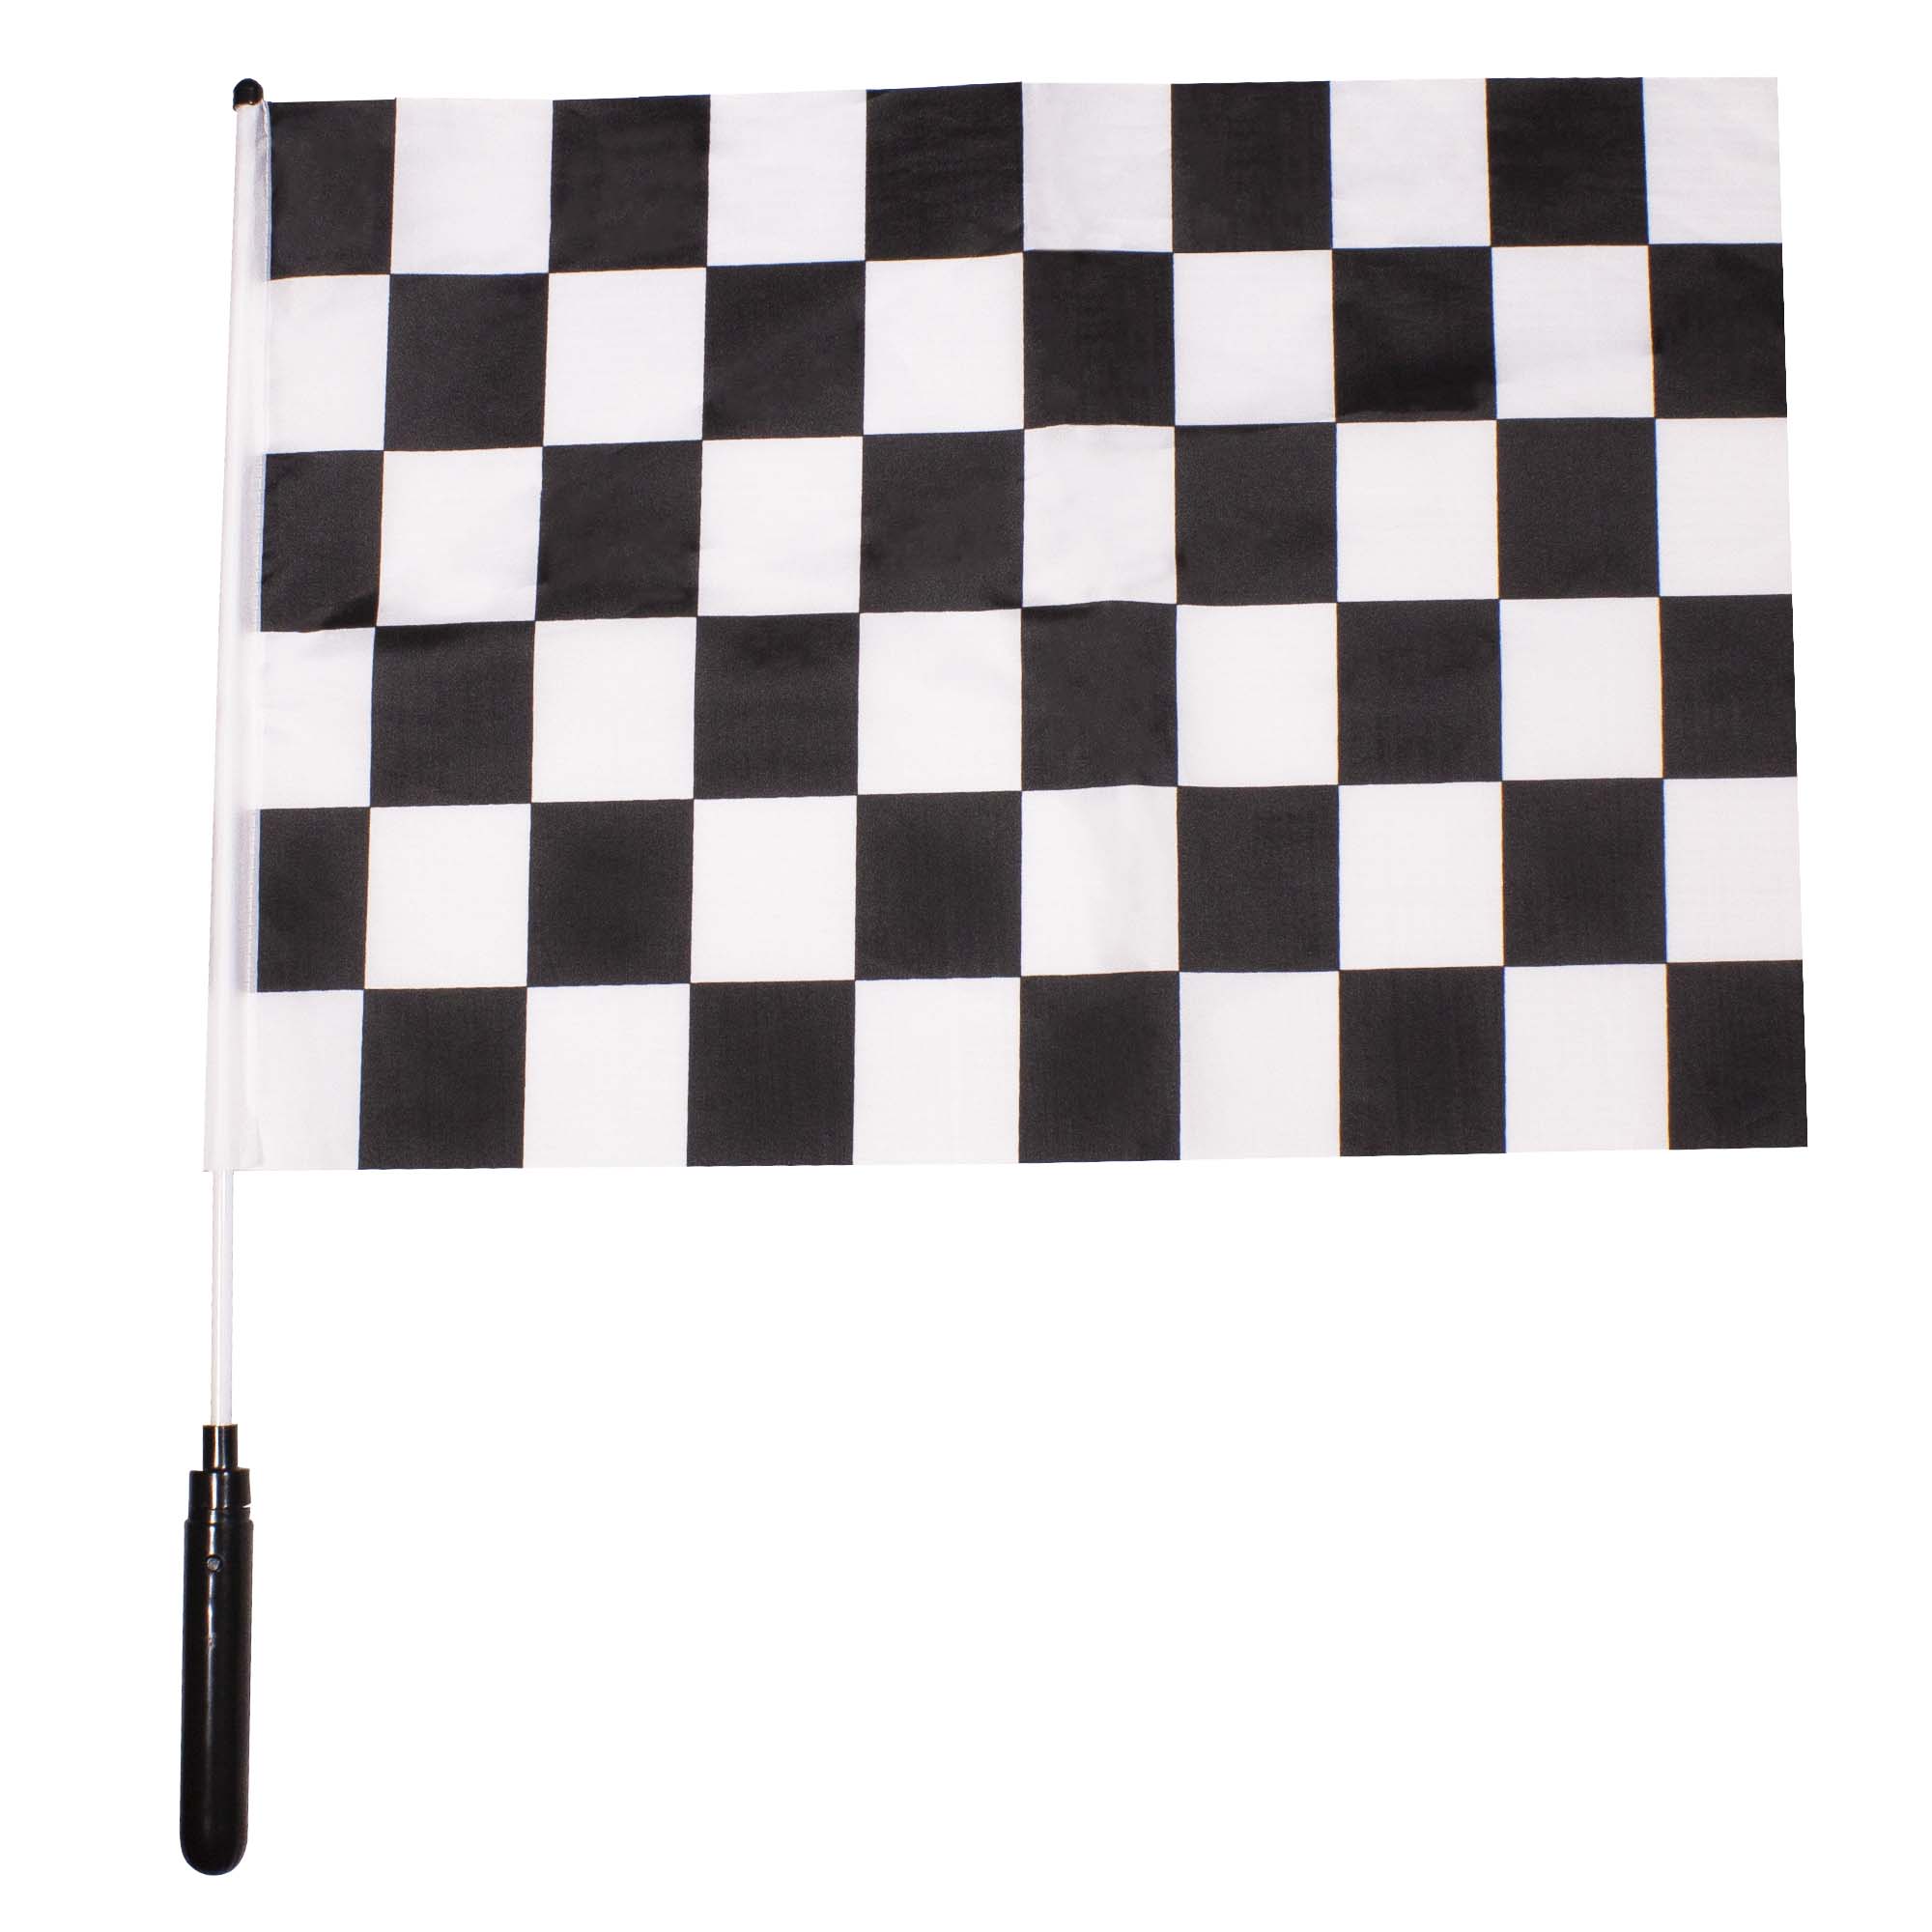 HUGE FLAG 8X5 FEET BLUE AND & WHITE CHECKERED CHEQUERED FLAGS SPORT RACING 8 X 5 